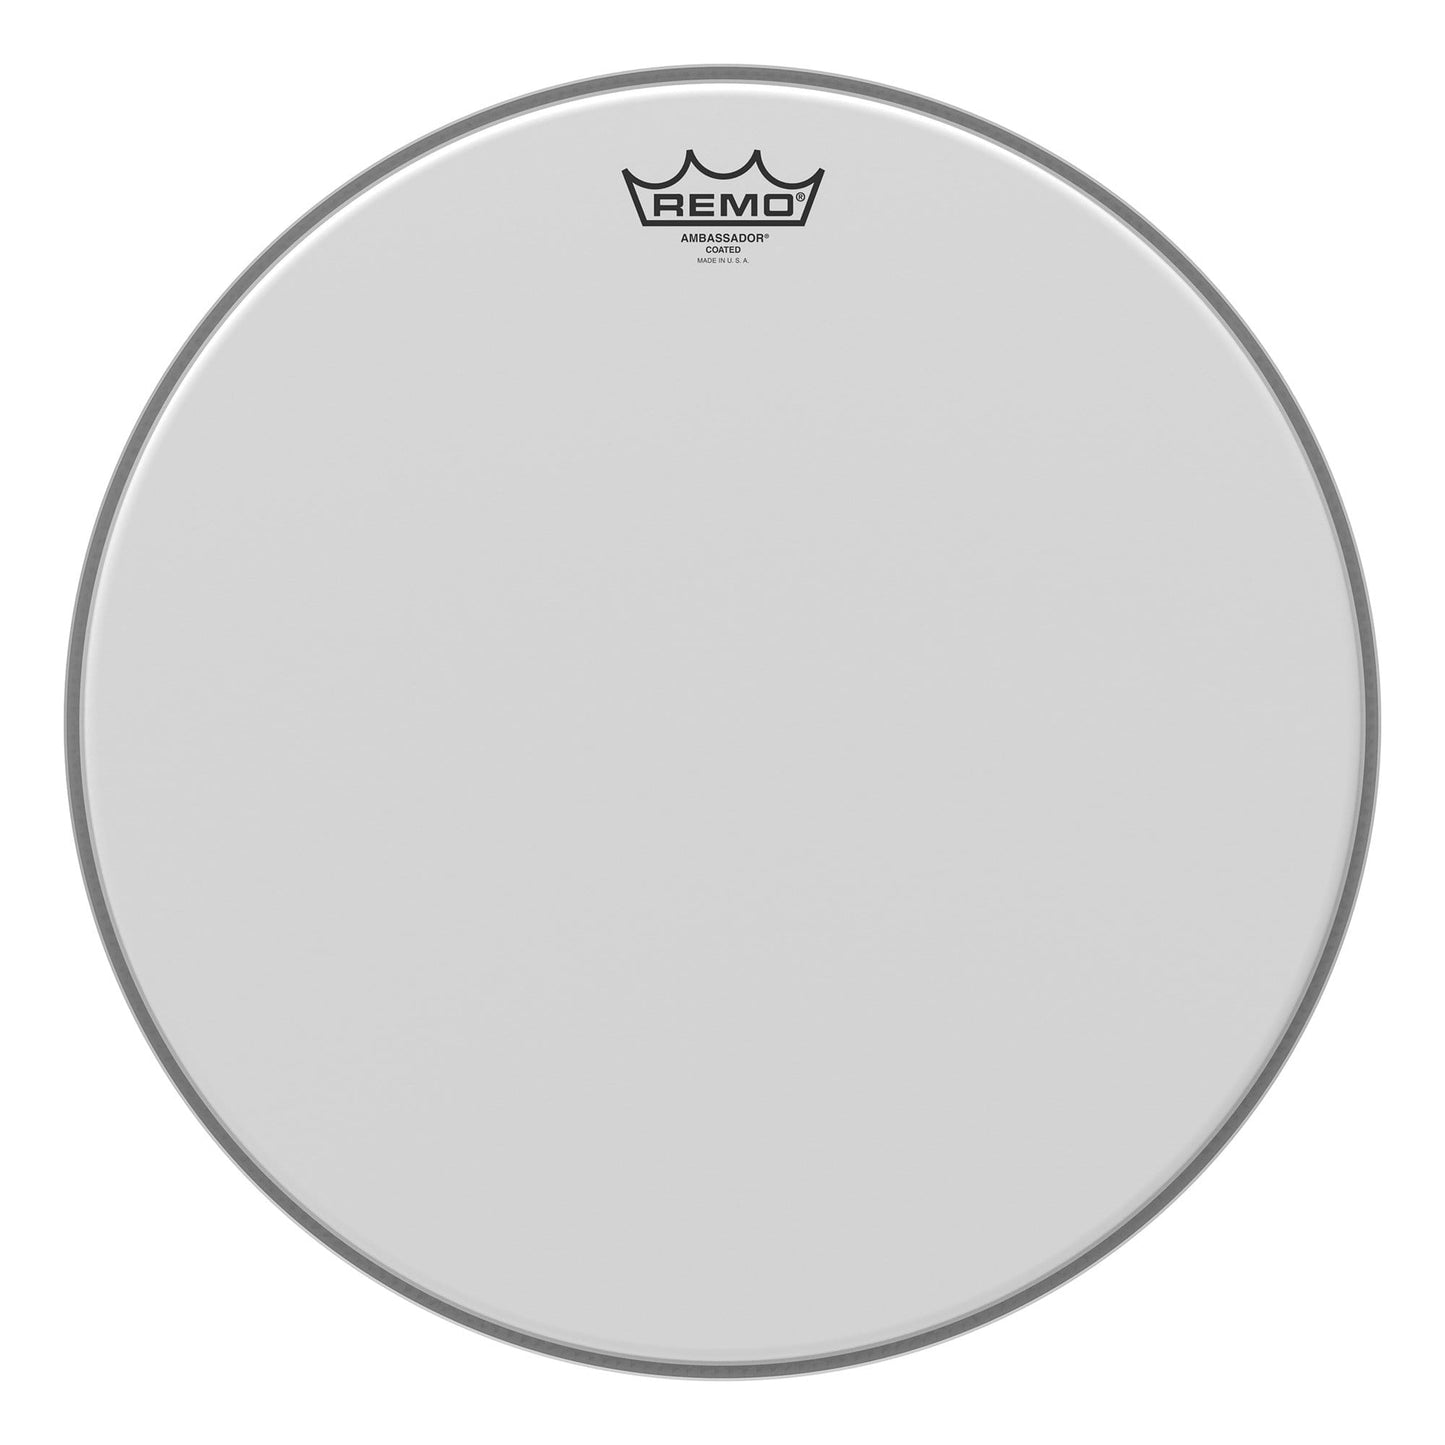 Remo 16" Ambassador Coated Drumhead Drums and Percussion / Parts and Accessories / Heads